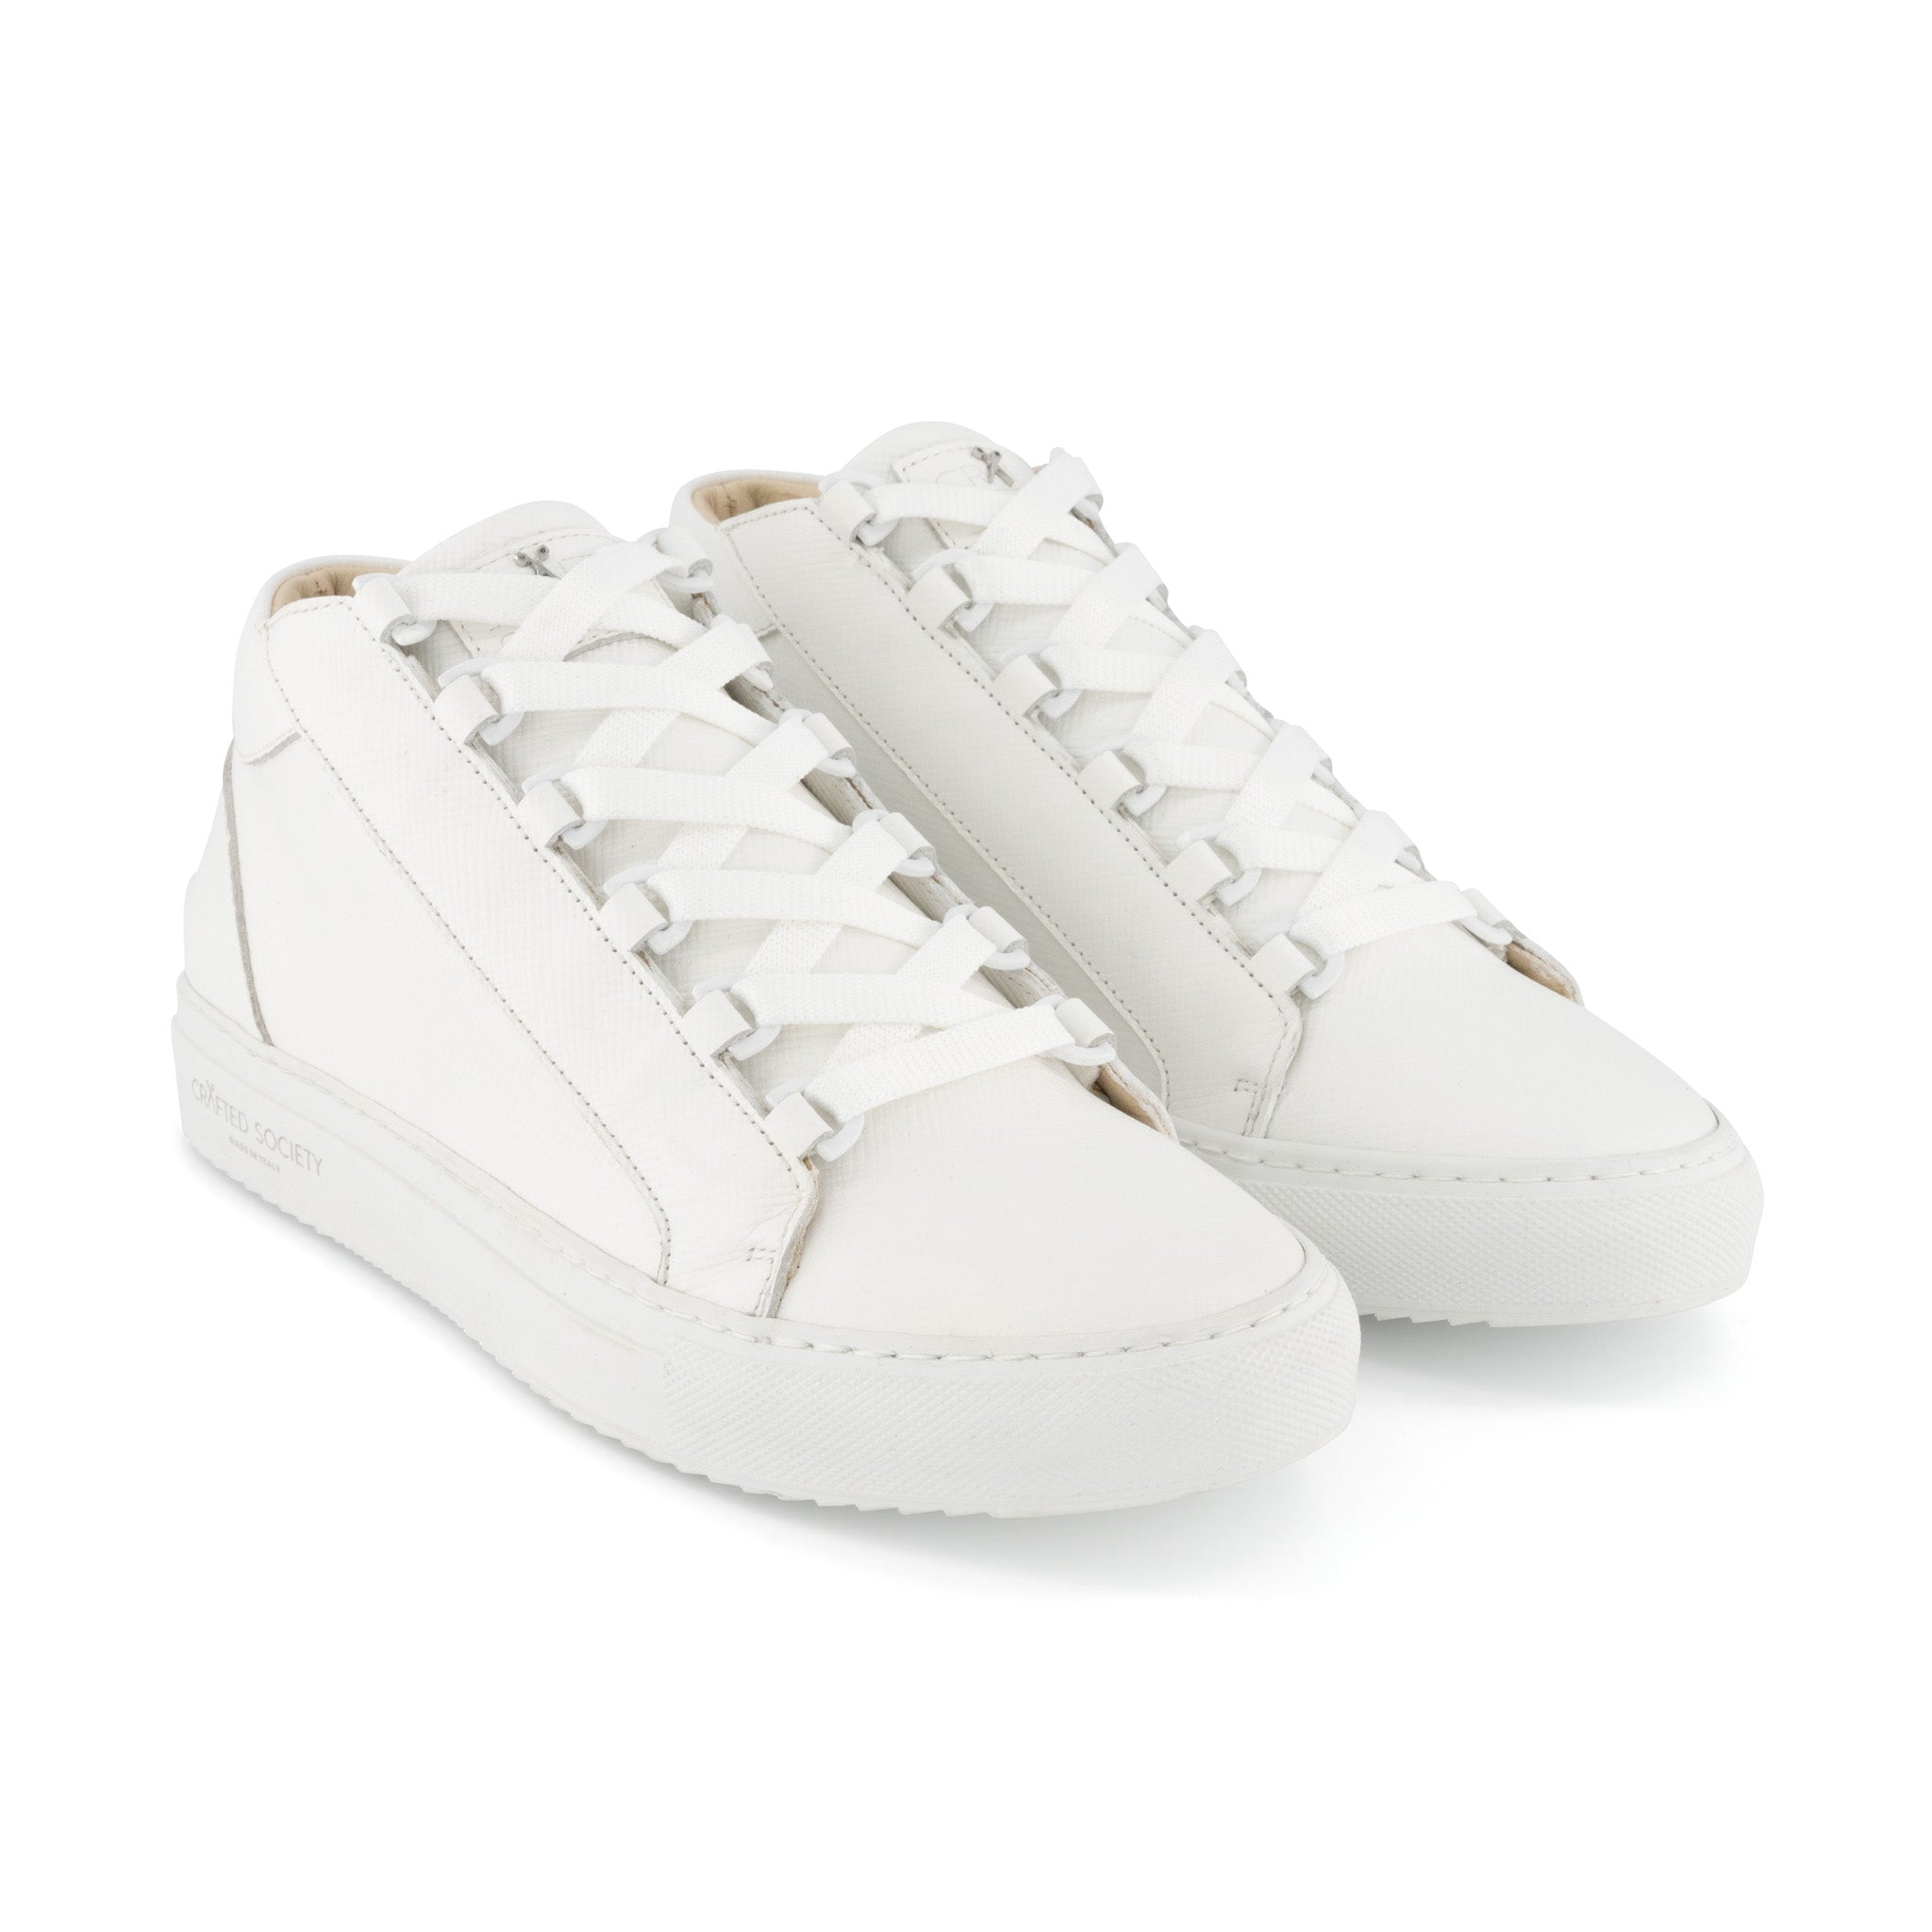 Rico Mid Sneaker | White Saffiano Leather | White Outsole | Made in Italy | Sizes 40, 41